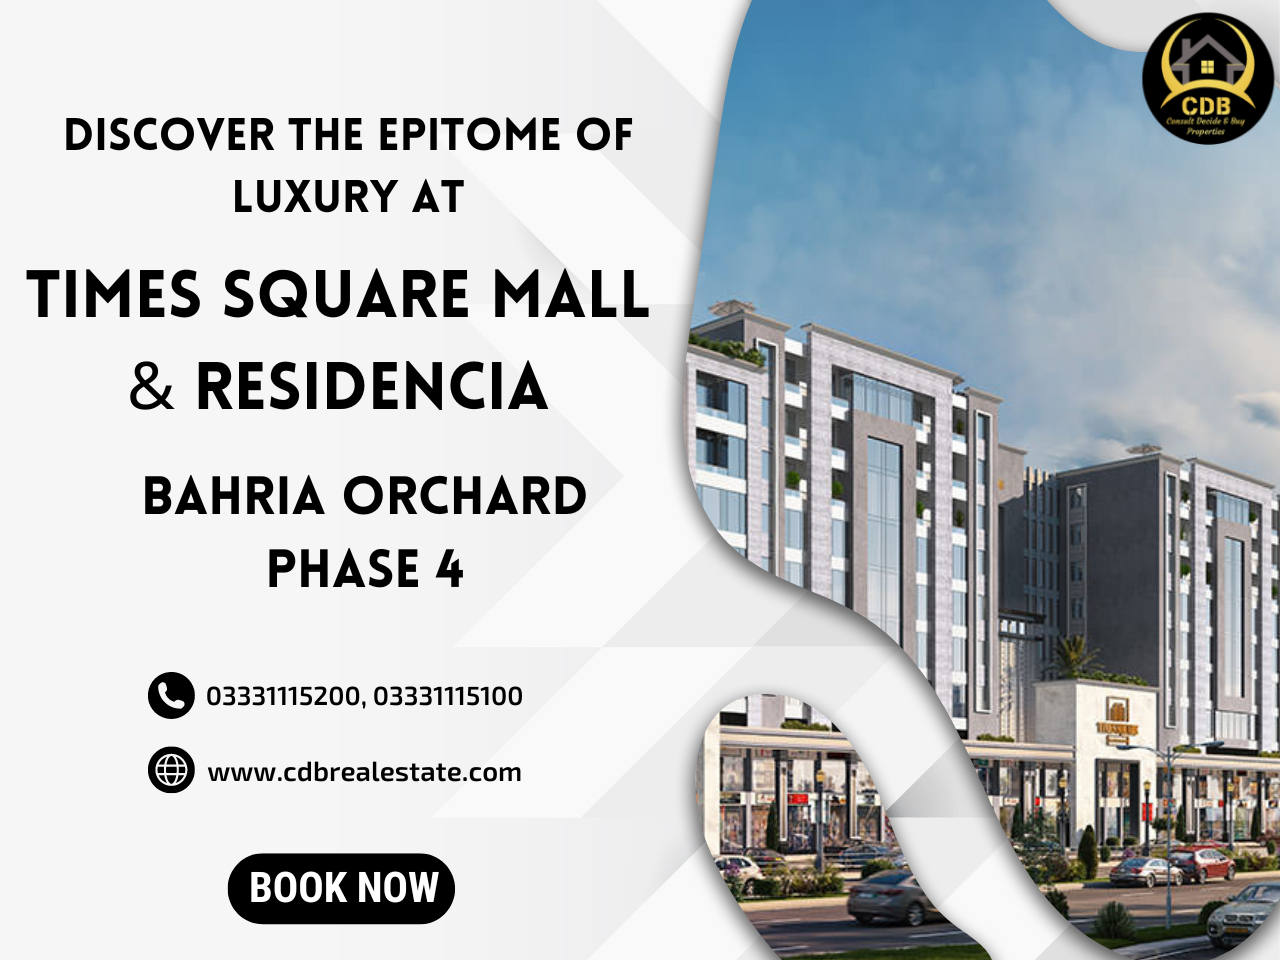 Discover the Epitome of Luxury at Times Square Mall & Residencia, Bahria Orchard Phase 4